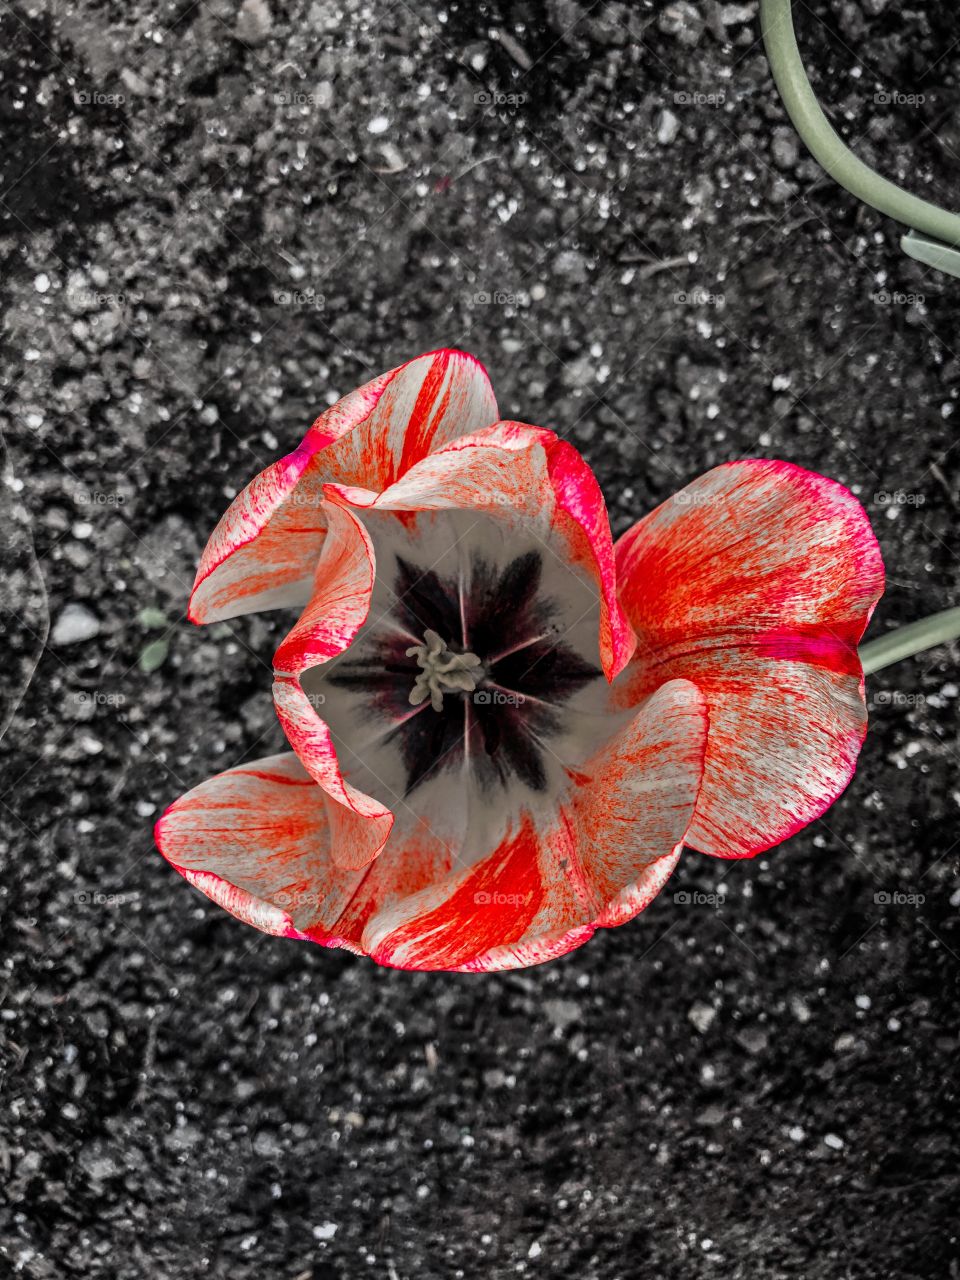 Red and white flower